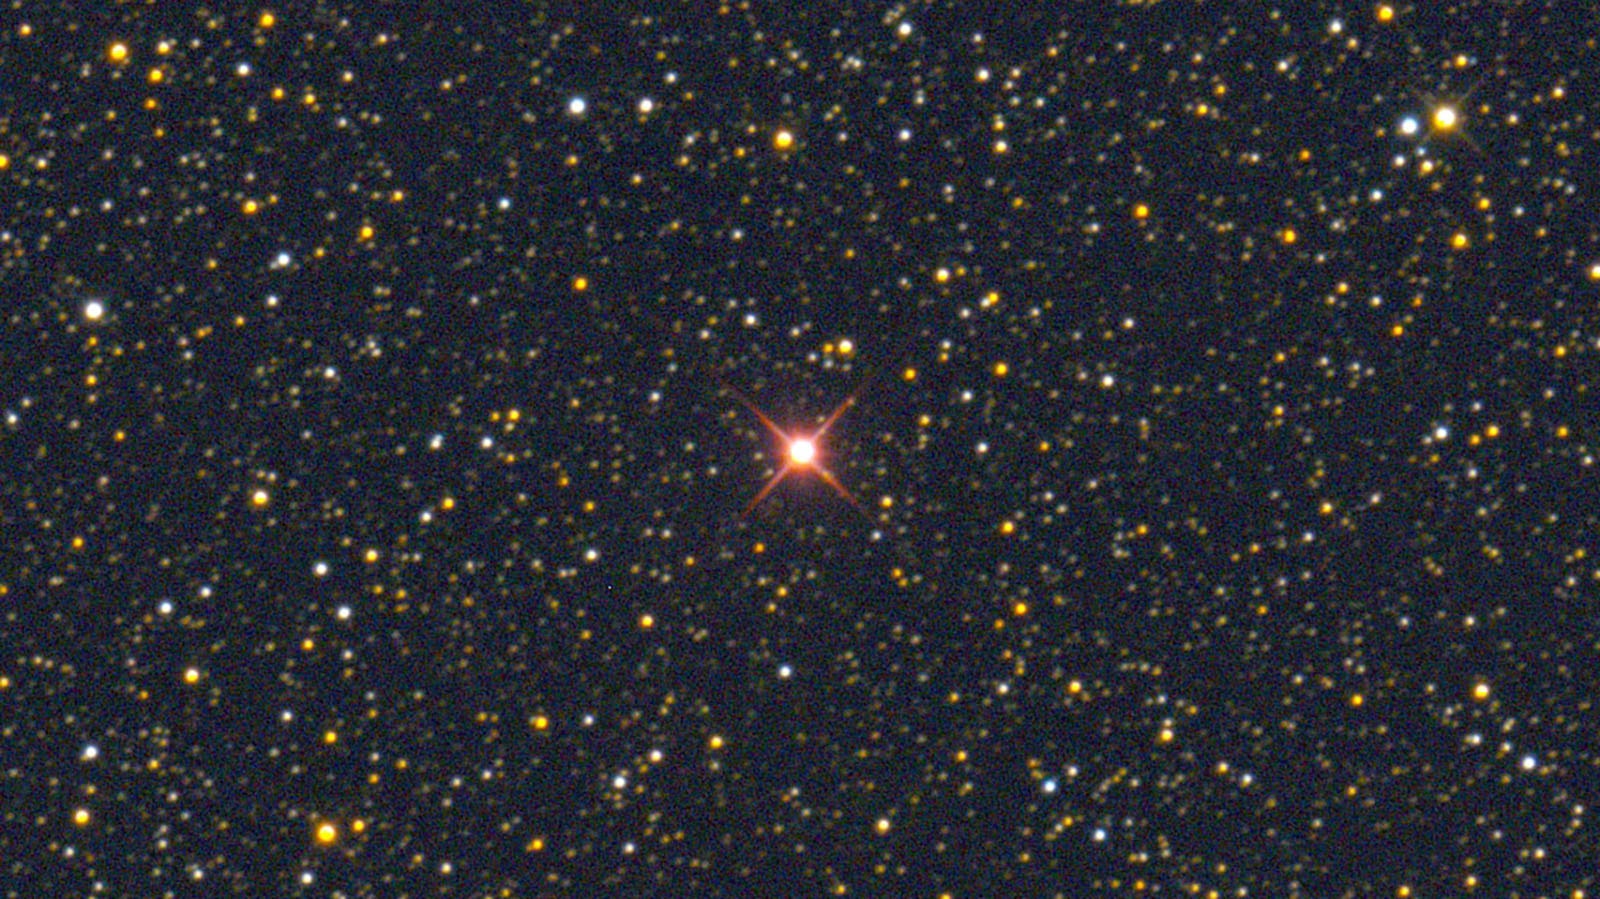 A nova in Hercules glows red during its early explosive phase.